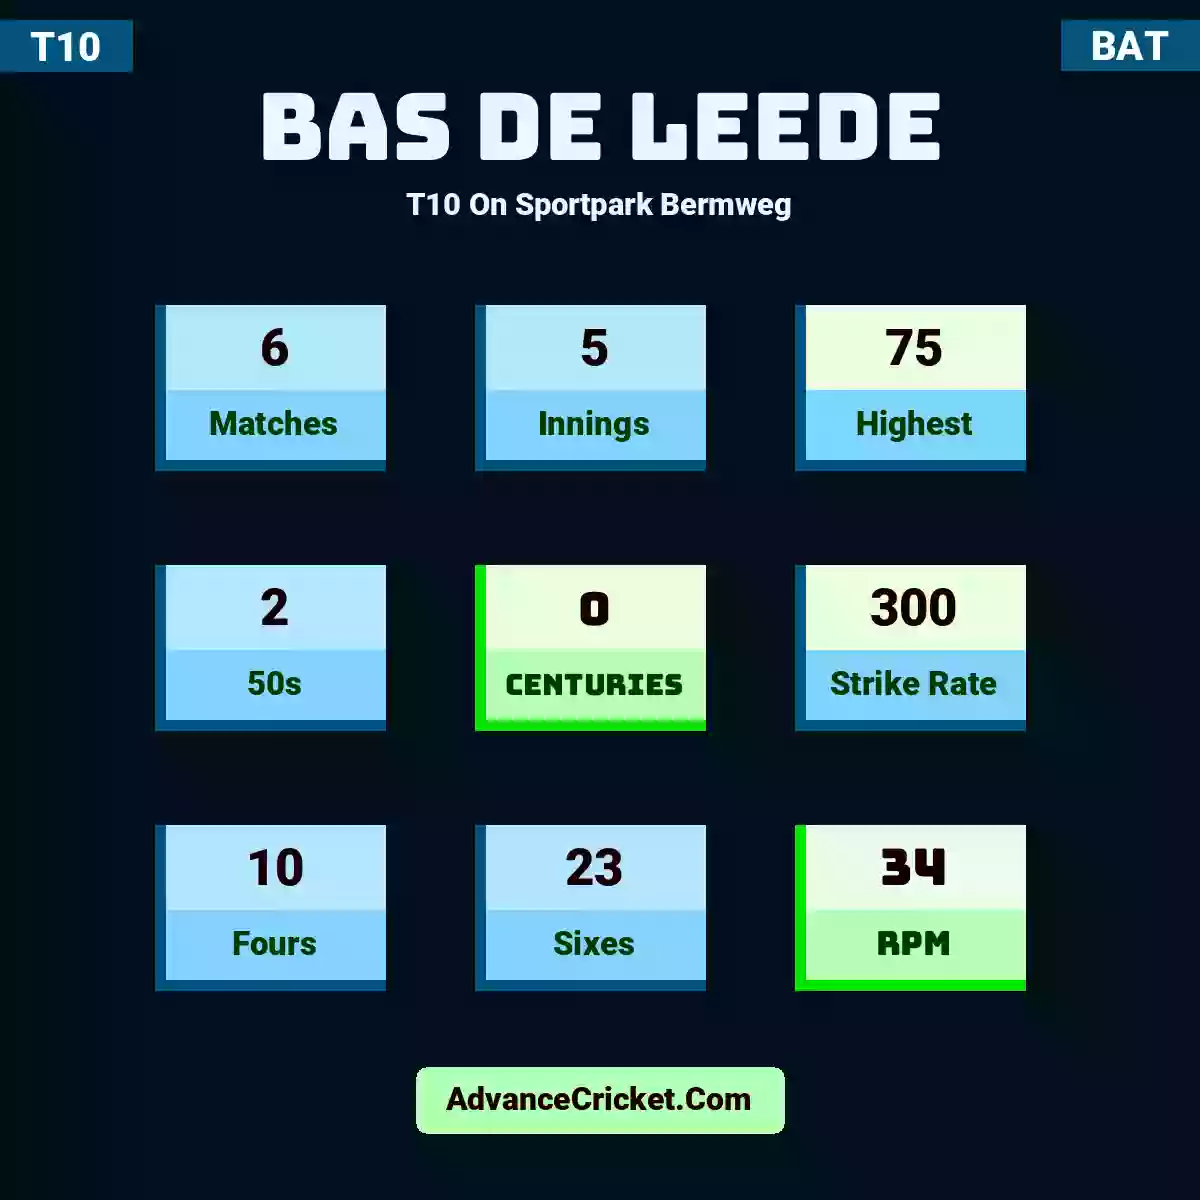 Bas de Leede T10  On Sportpark Bermweg, Bas de Leede played 6 matches, scored 75 runs as highest, 2 half-centuries, and 0 centuries, with a strike rate of 300. B.Leede hit 10 fours and 23 sixes, with an RPM of 34.